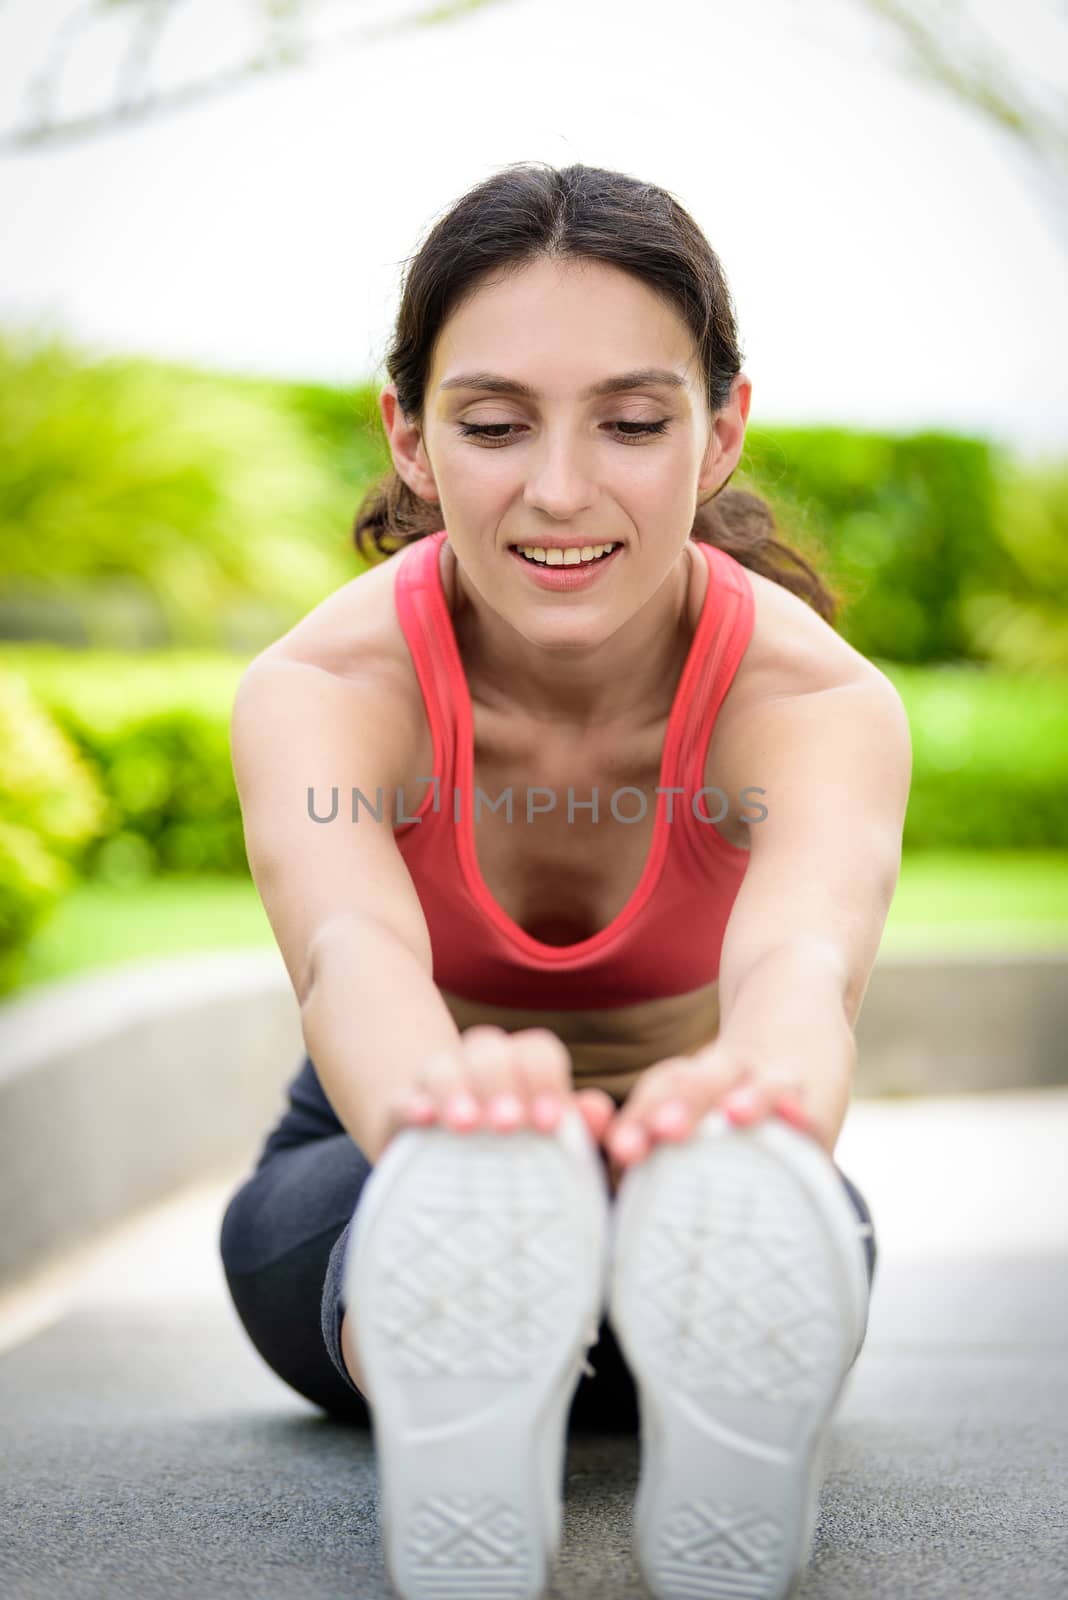 Beautiful woman runner has to warm up with stretching in the garden.